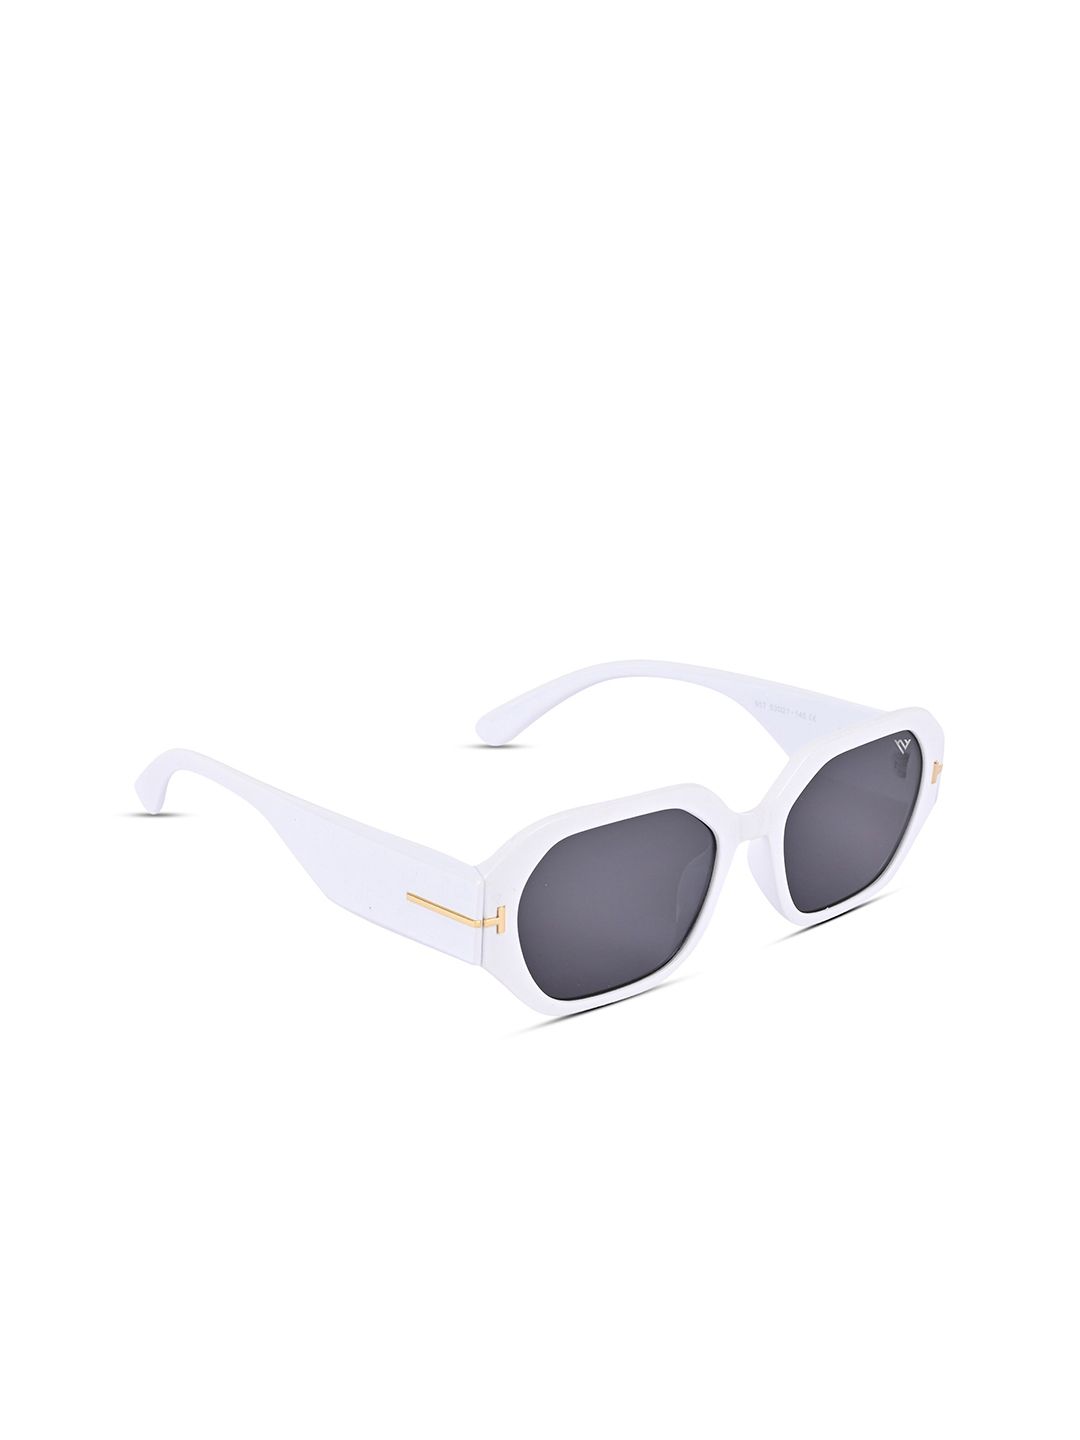 Voyage Unisex Black Lens & White Rectangle Sunglasses with UV Protected Lens Price in India